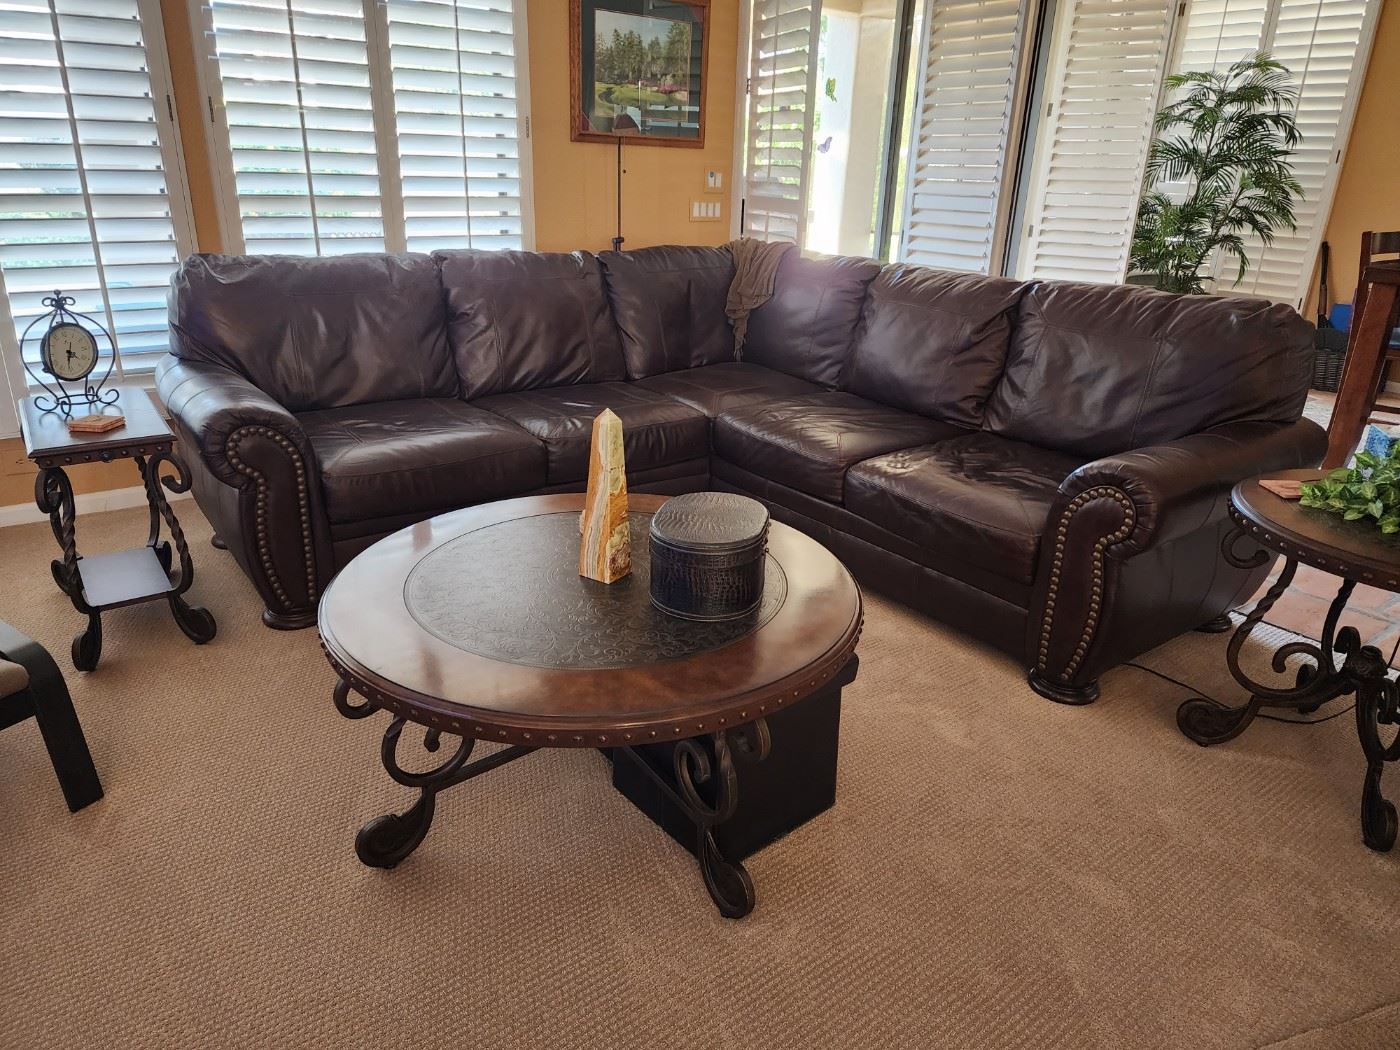 Beautiful leather sectional 